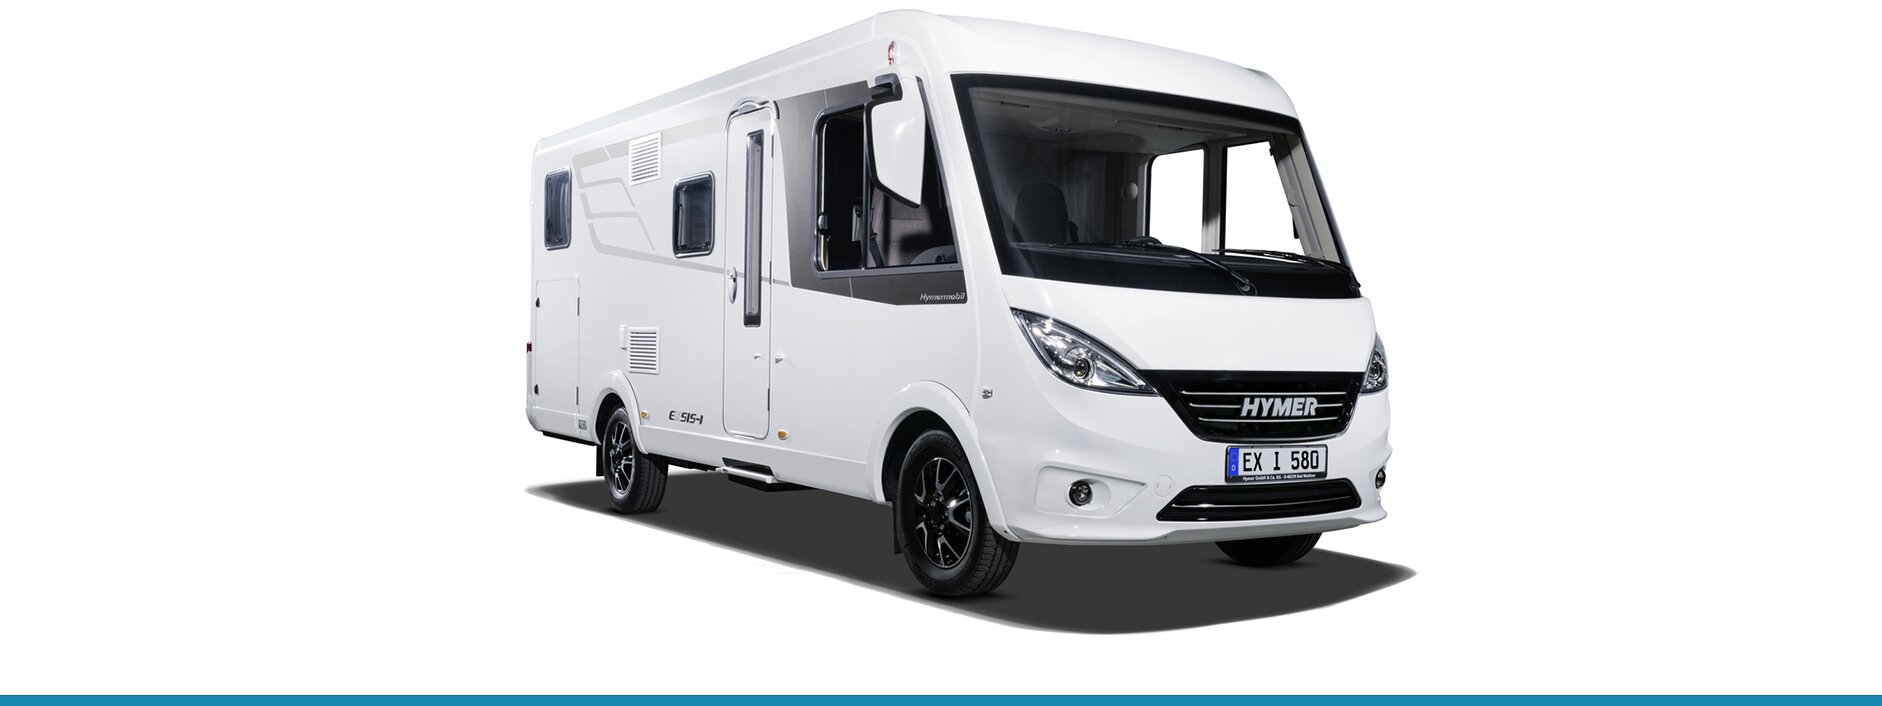 Editions-model HYMER Exsis-i 580 Pure